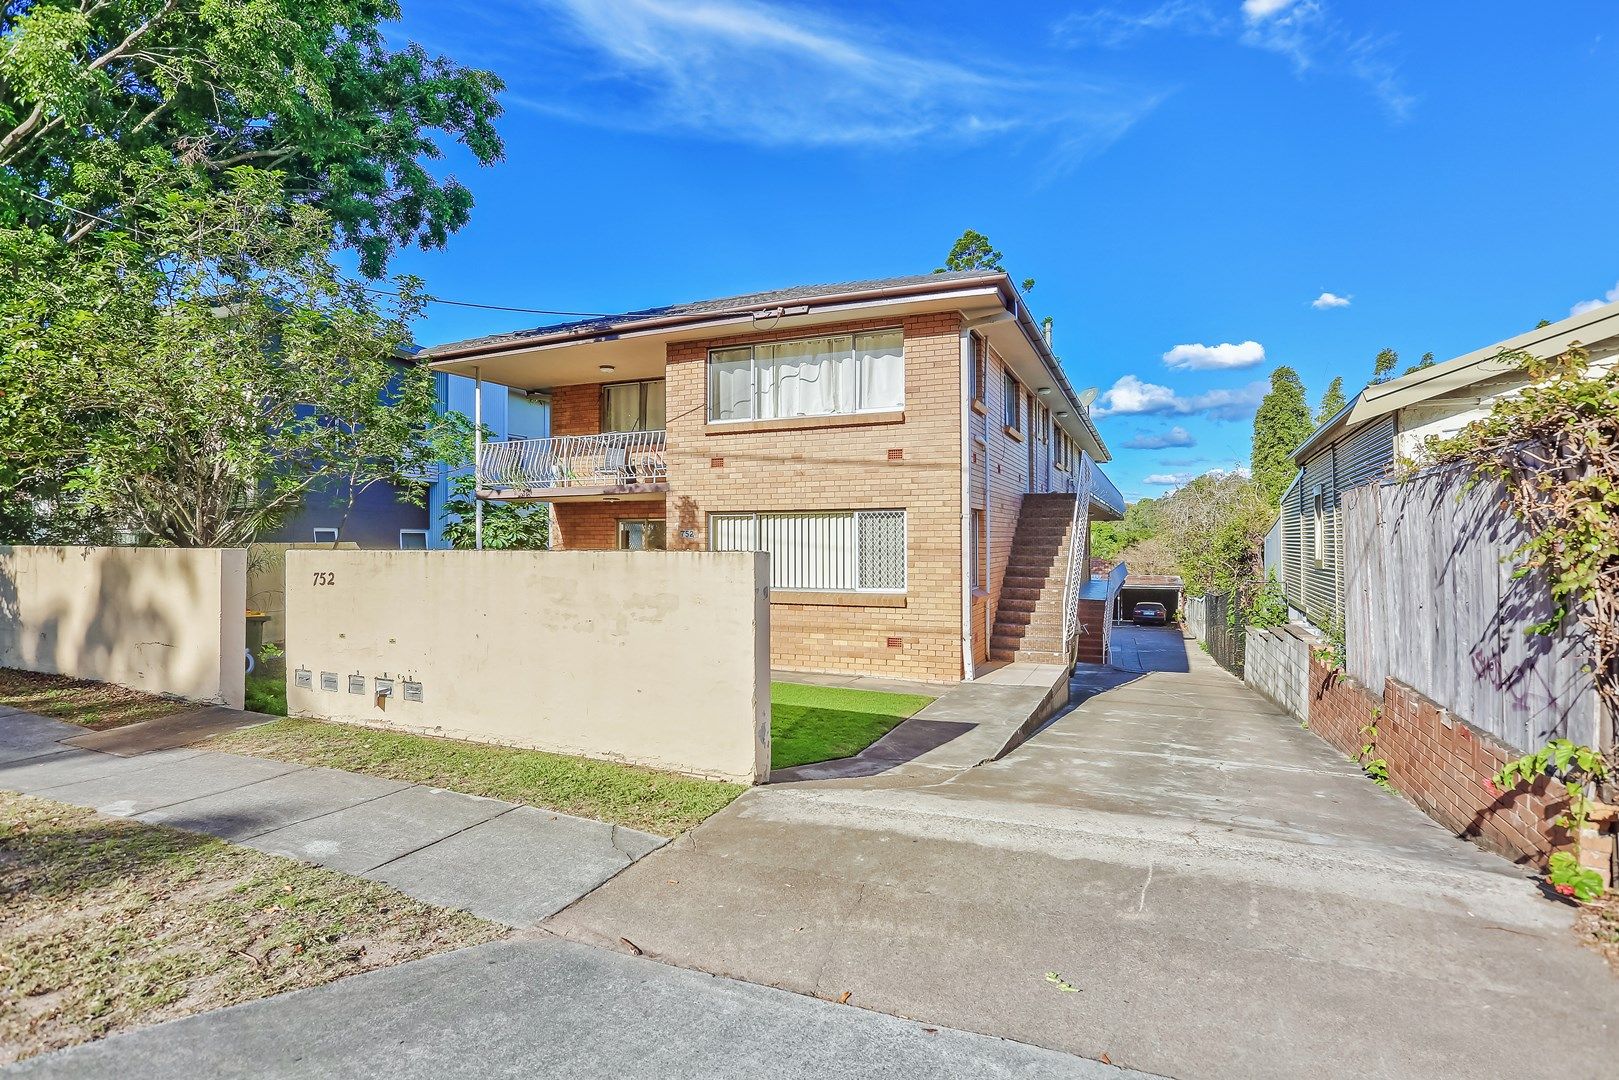 1/752 Ipswich Road, Annerley QLD 4103, Image 0